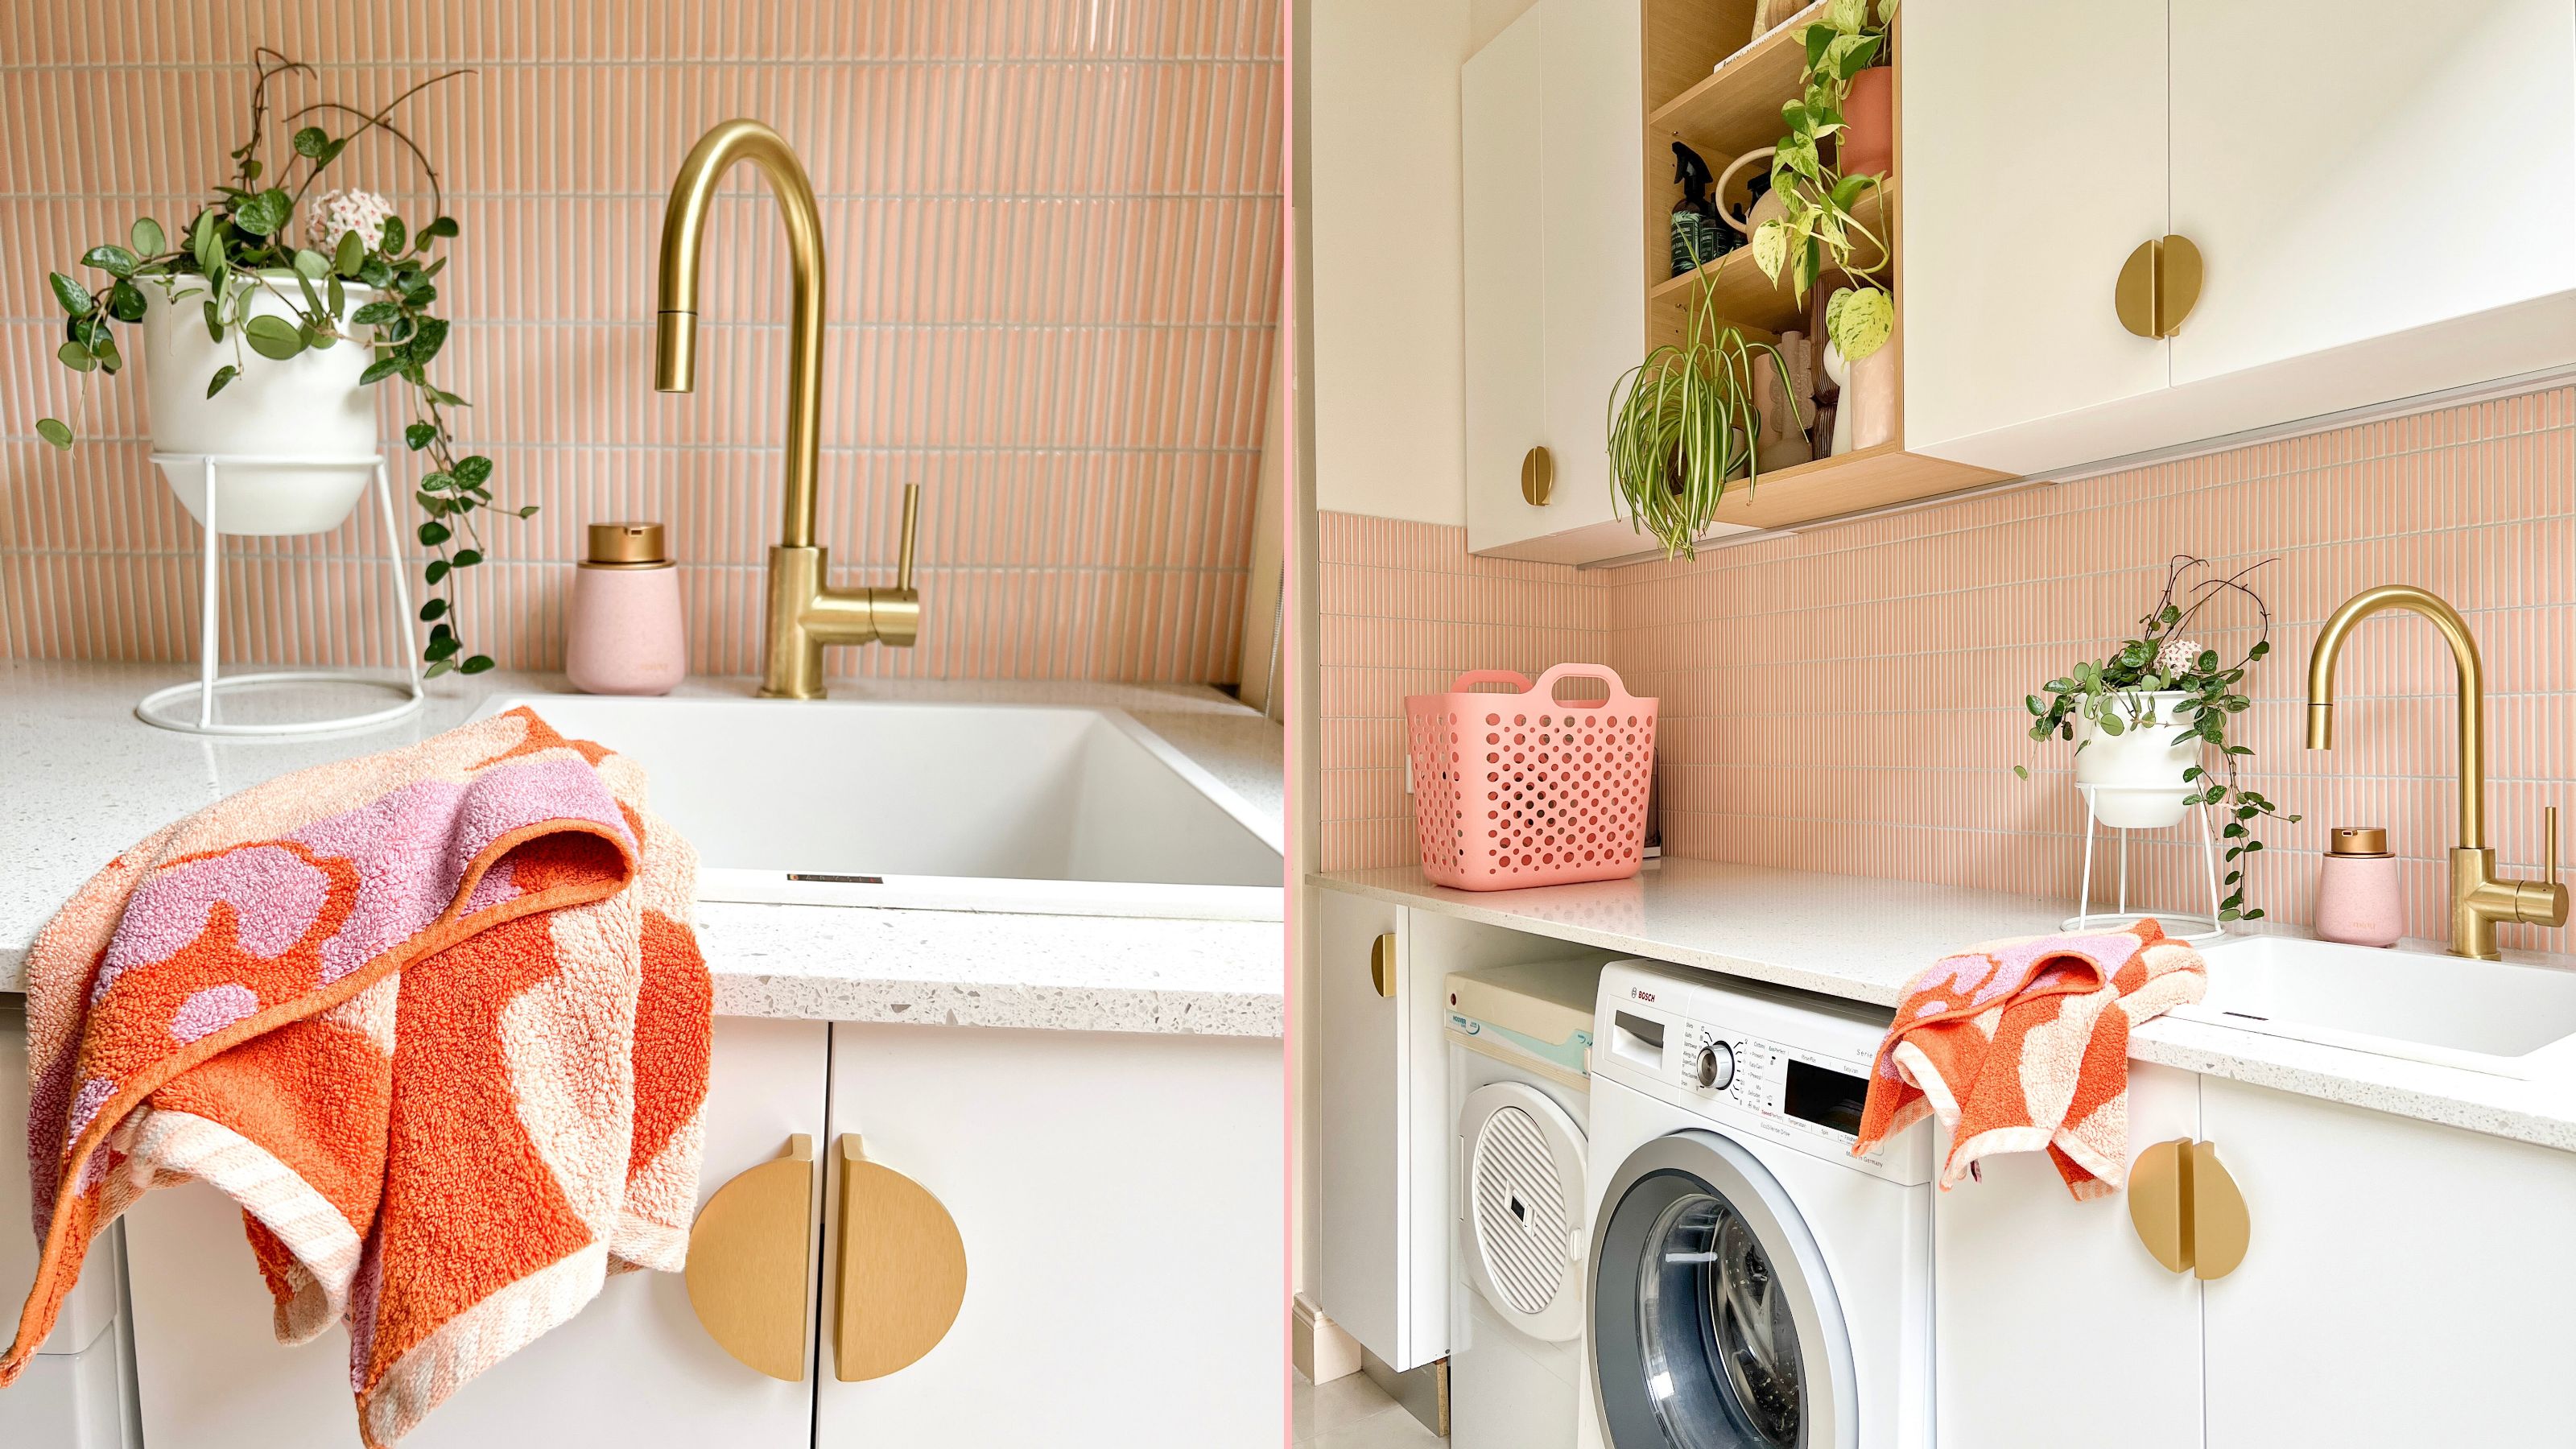 Laundry Room Sink Ideas - Plank and Pillow